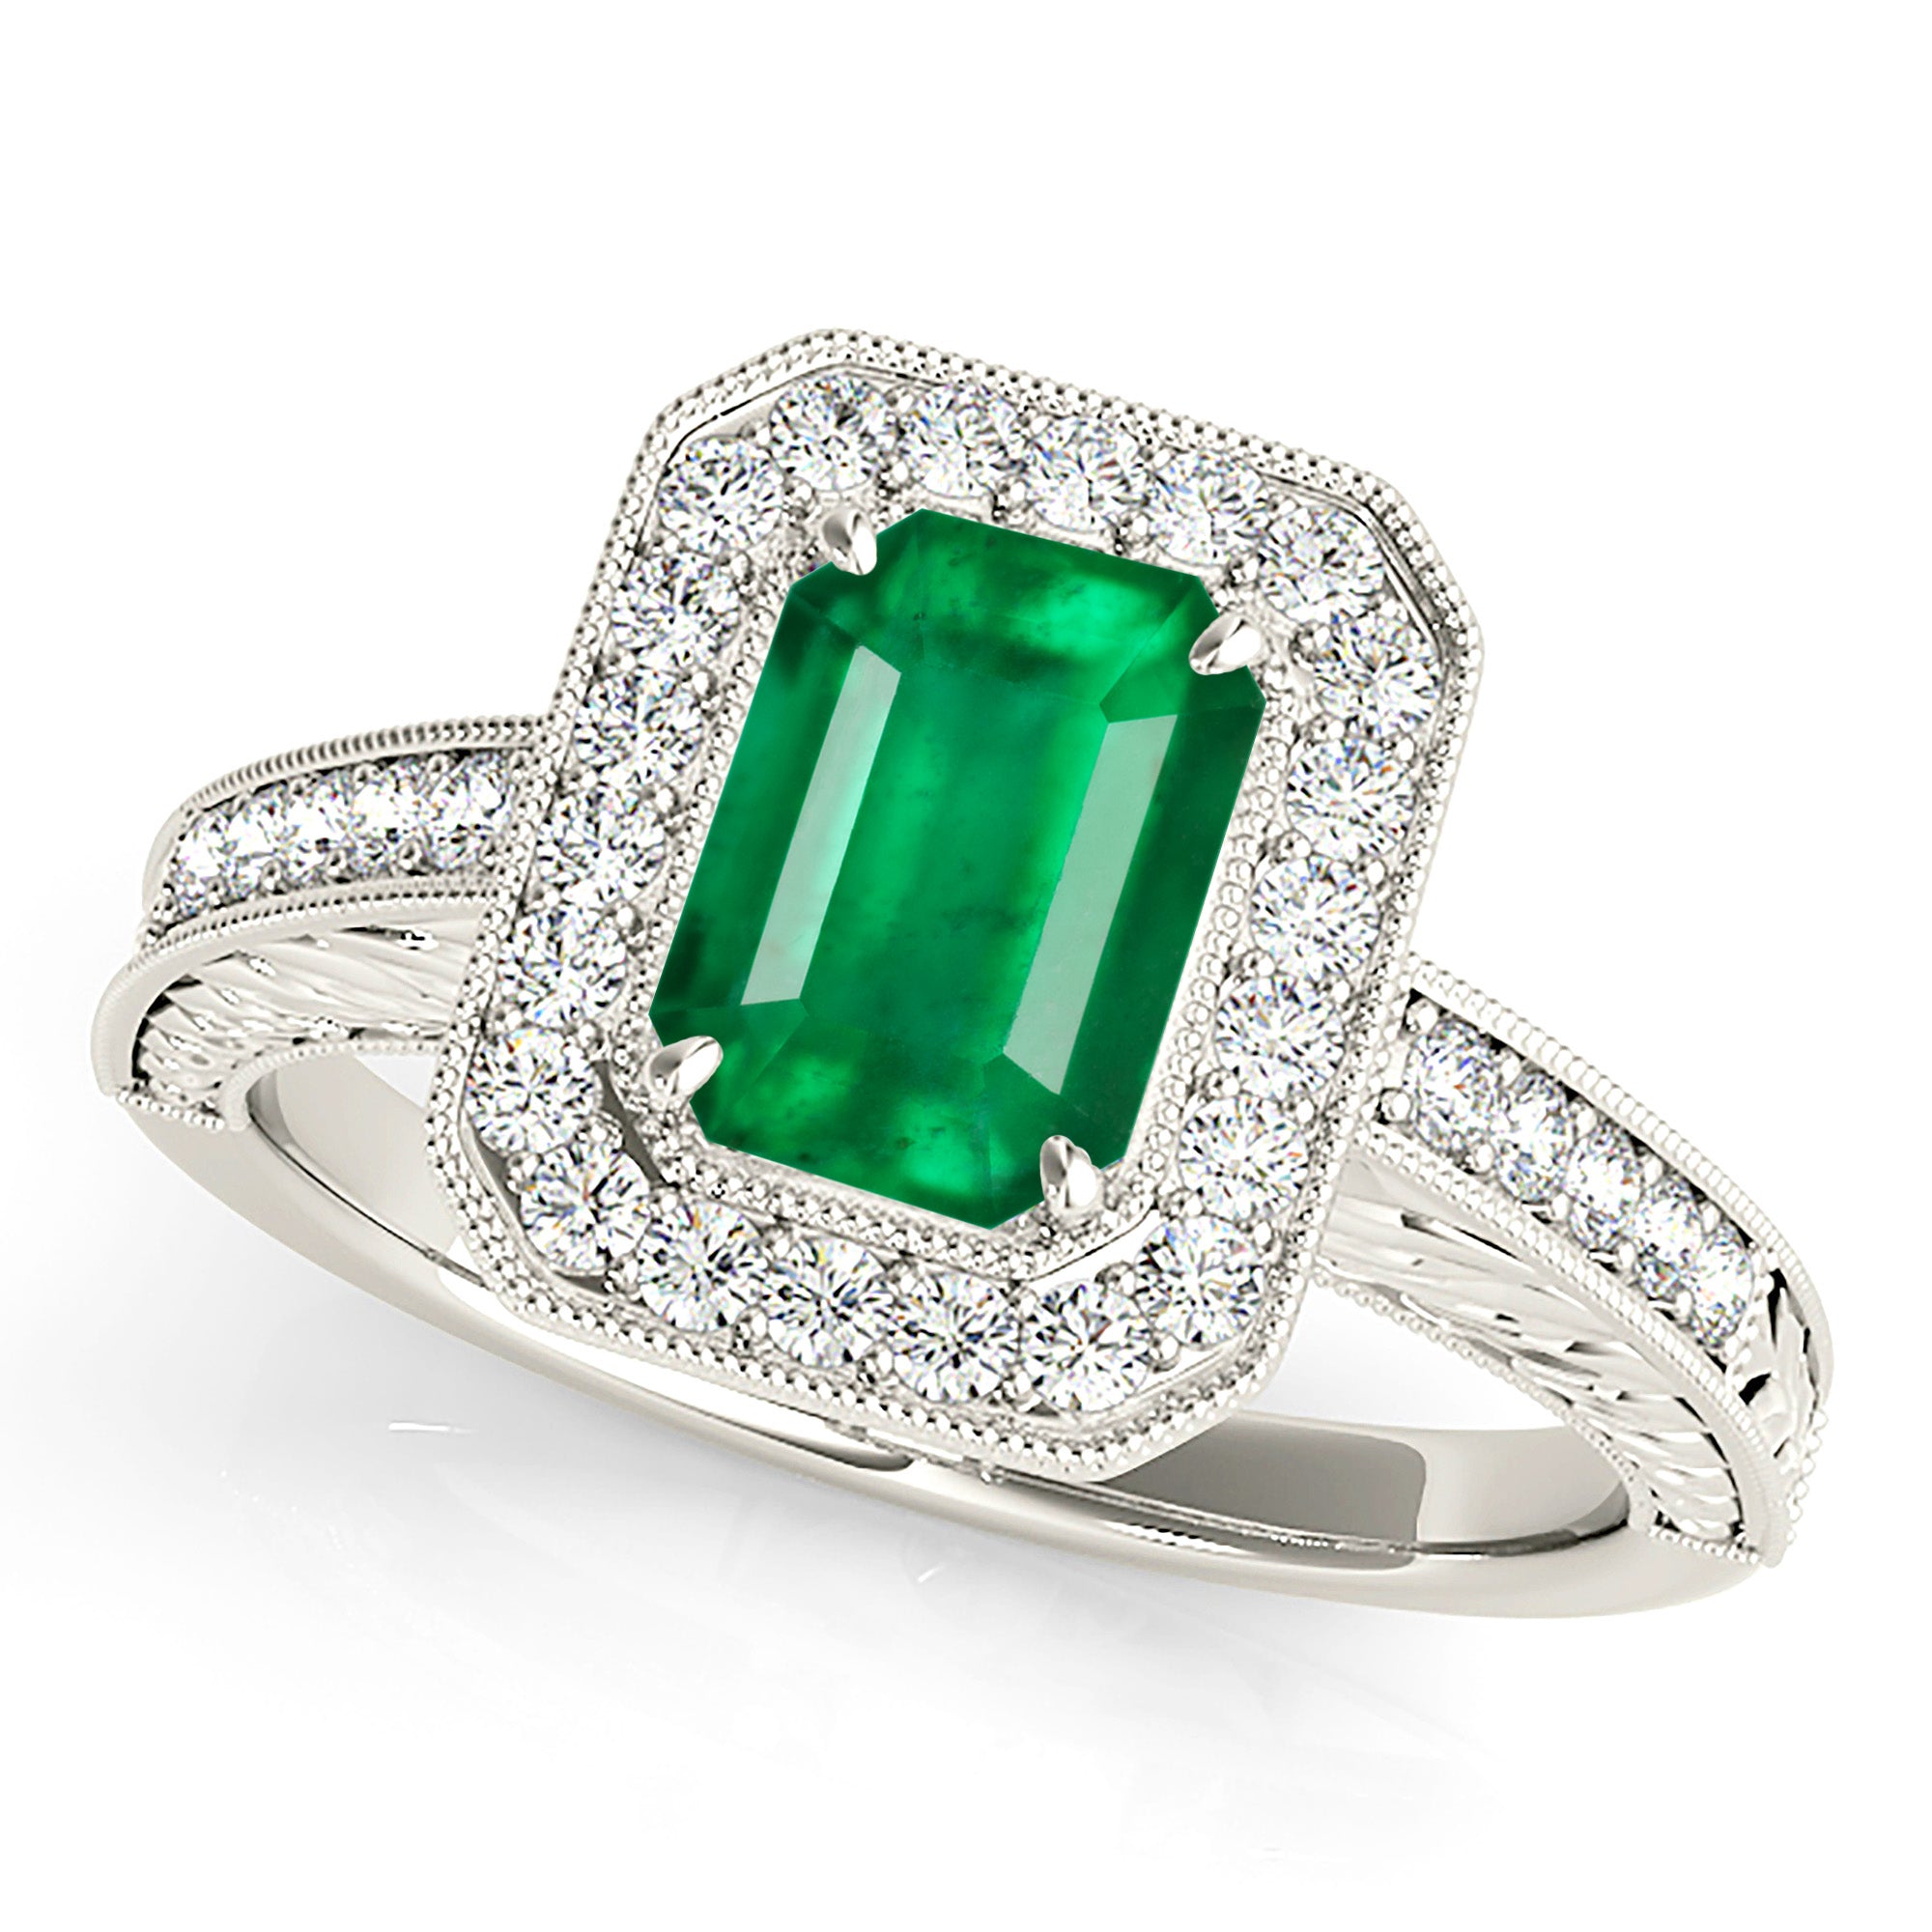 1.00 ct. Genuine Emerald Ring With 0.35 ctw. Channel Set Diamond Halo and Diamond Thin Shank-in 14K/18K White, Yellow, Rose Gold and Platinum - Christmas Jewelry Gift -VIRABYANI